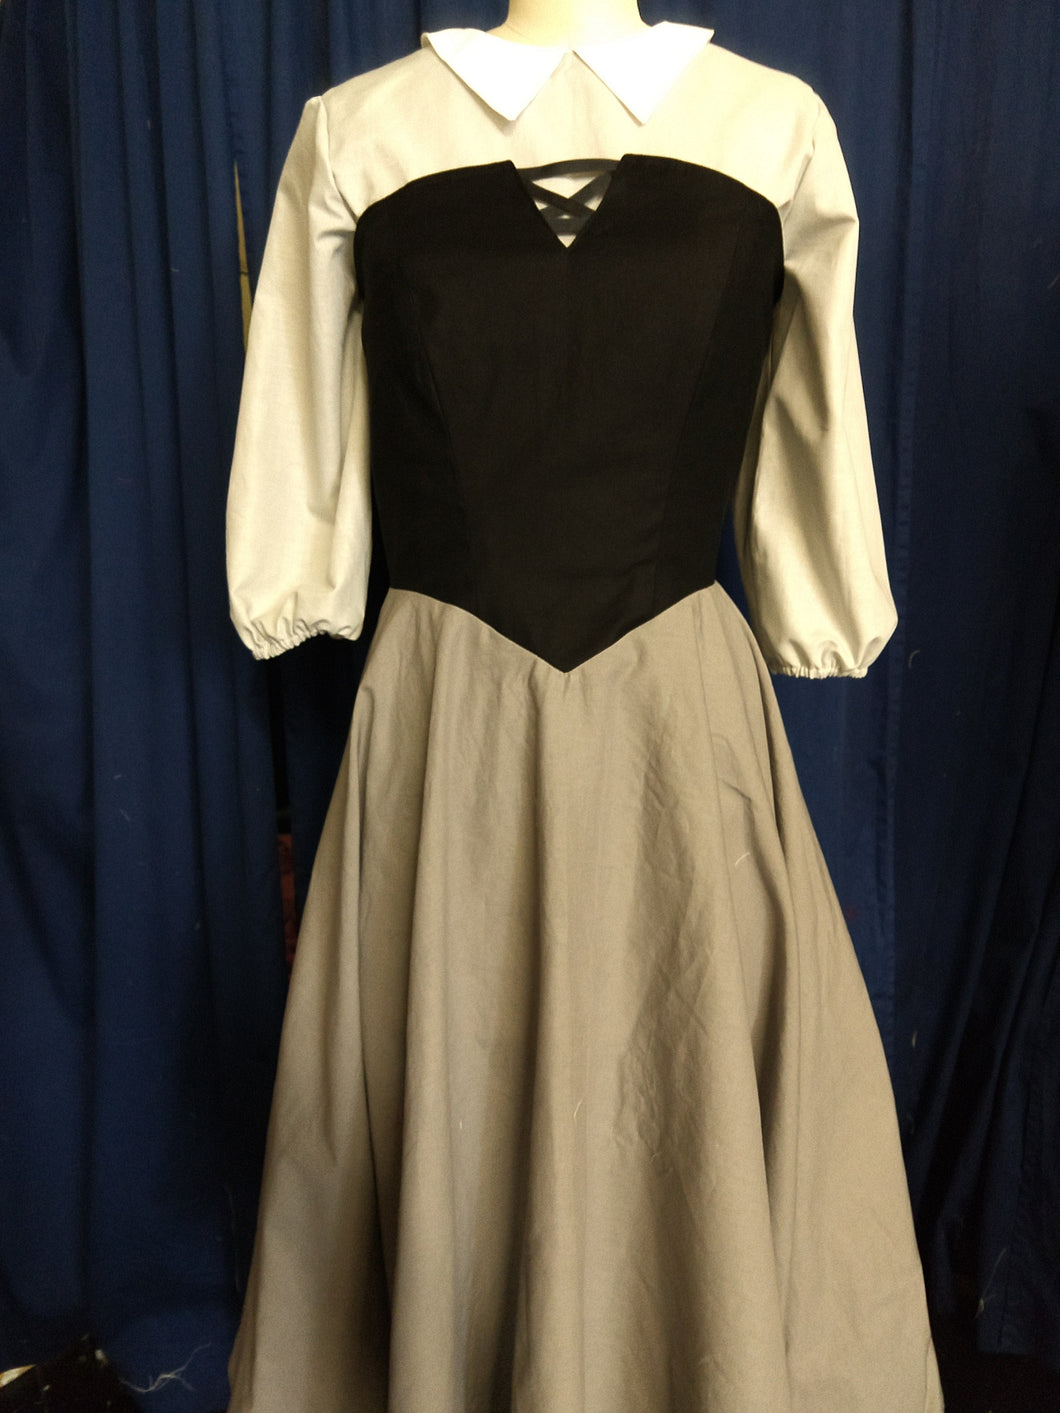 Briar Rose Peasant Dress from Sleeping Beauty READY TO SHIP